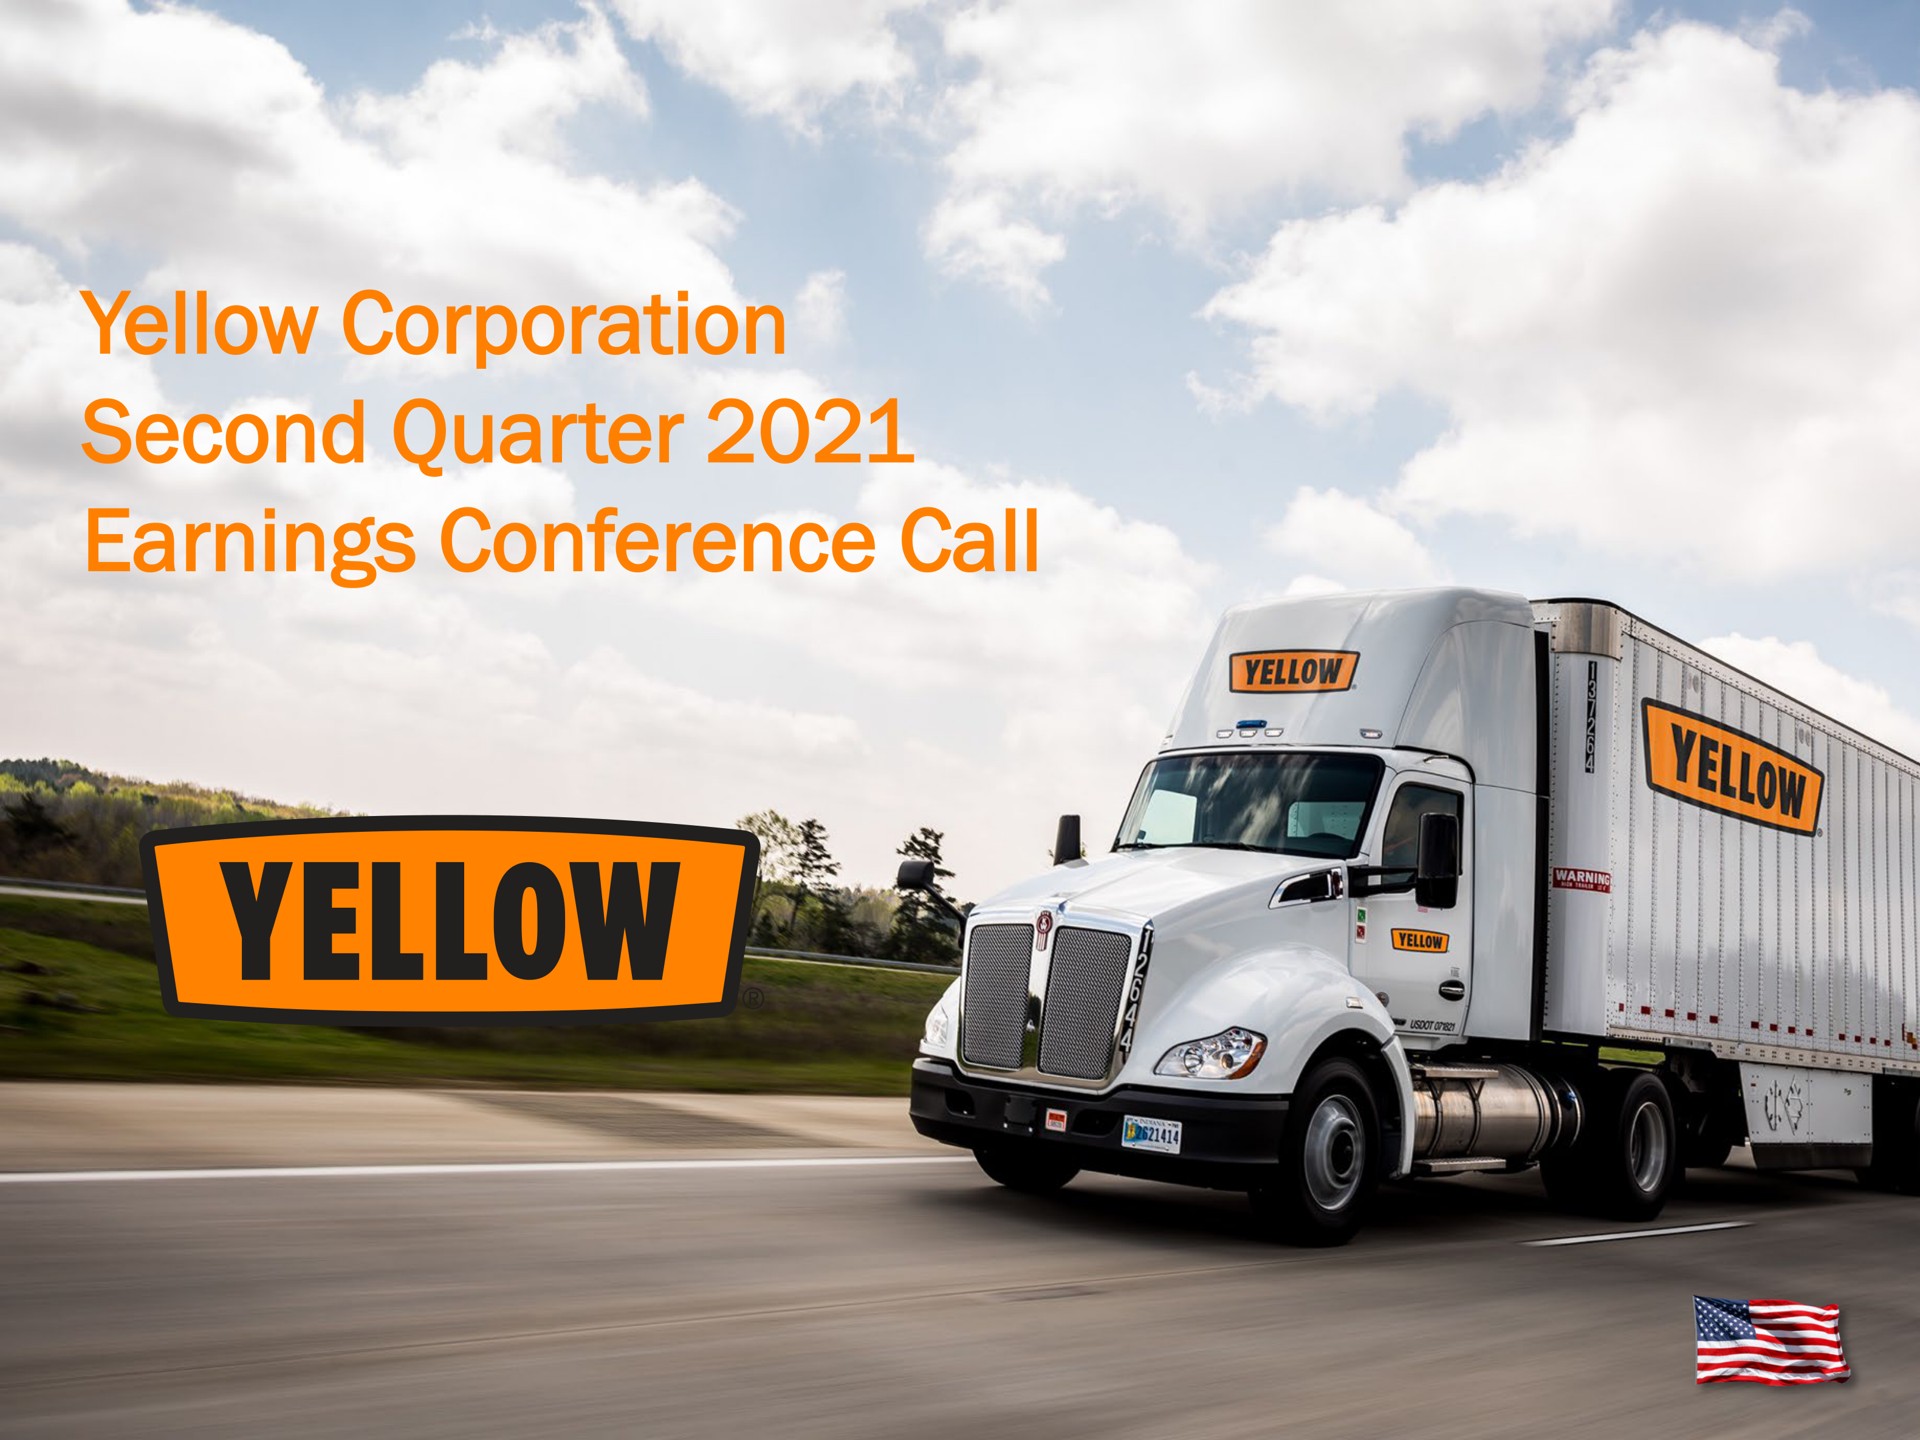 yellow corporation second quarter earnings conference call | Yellow Corporation